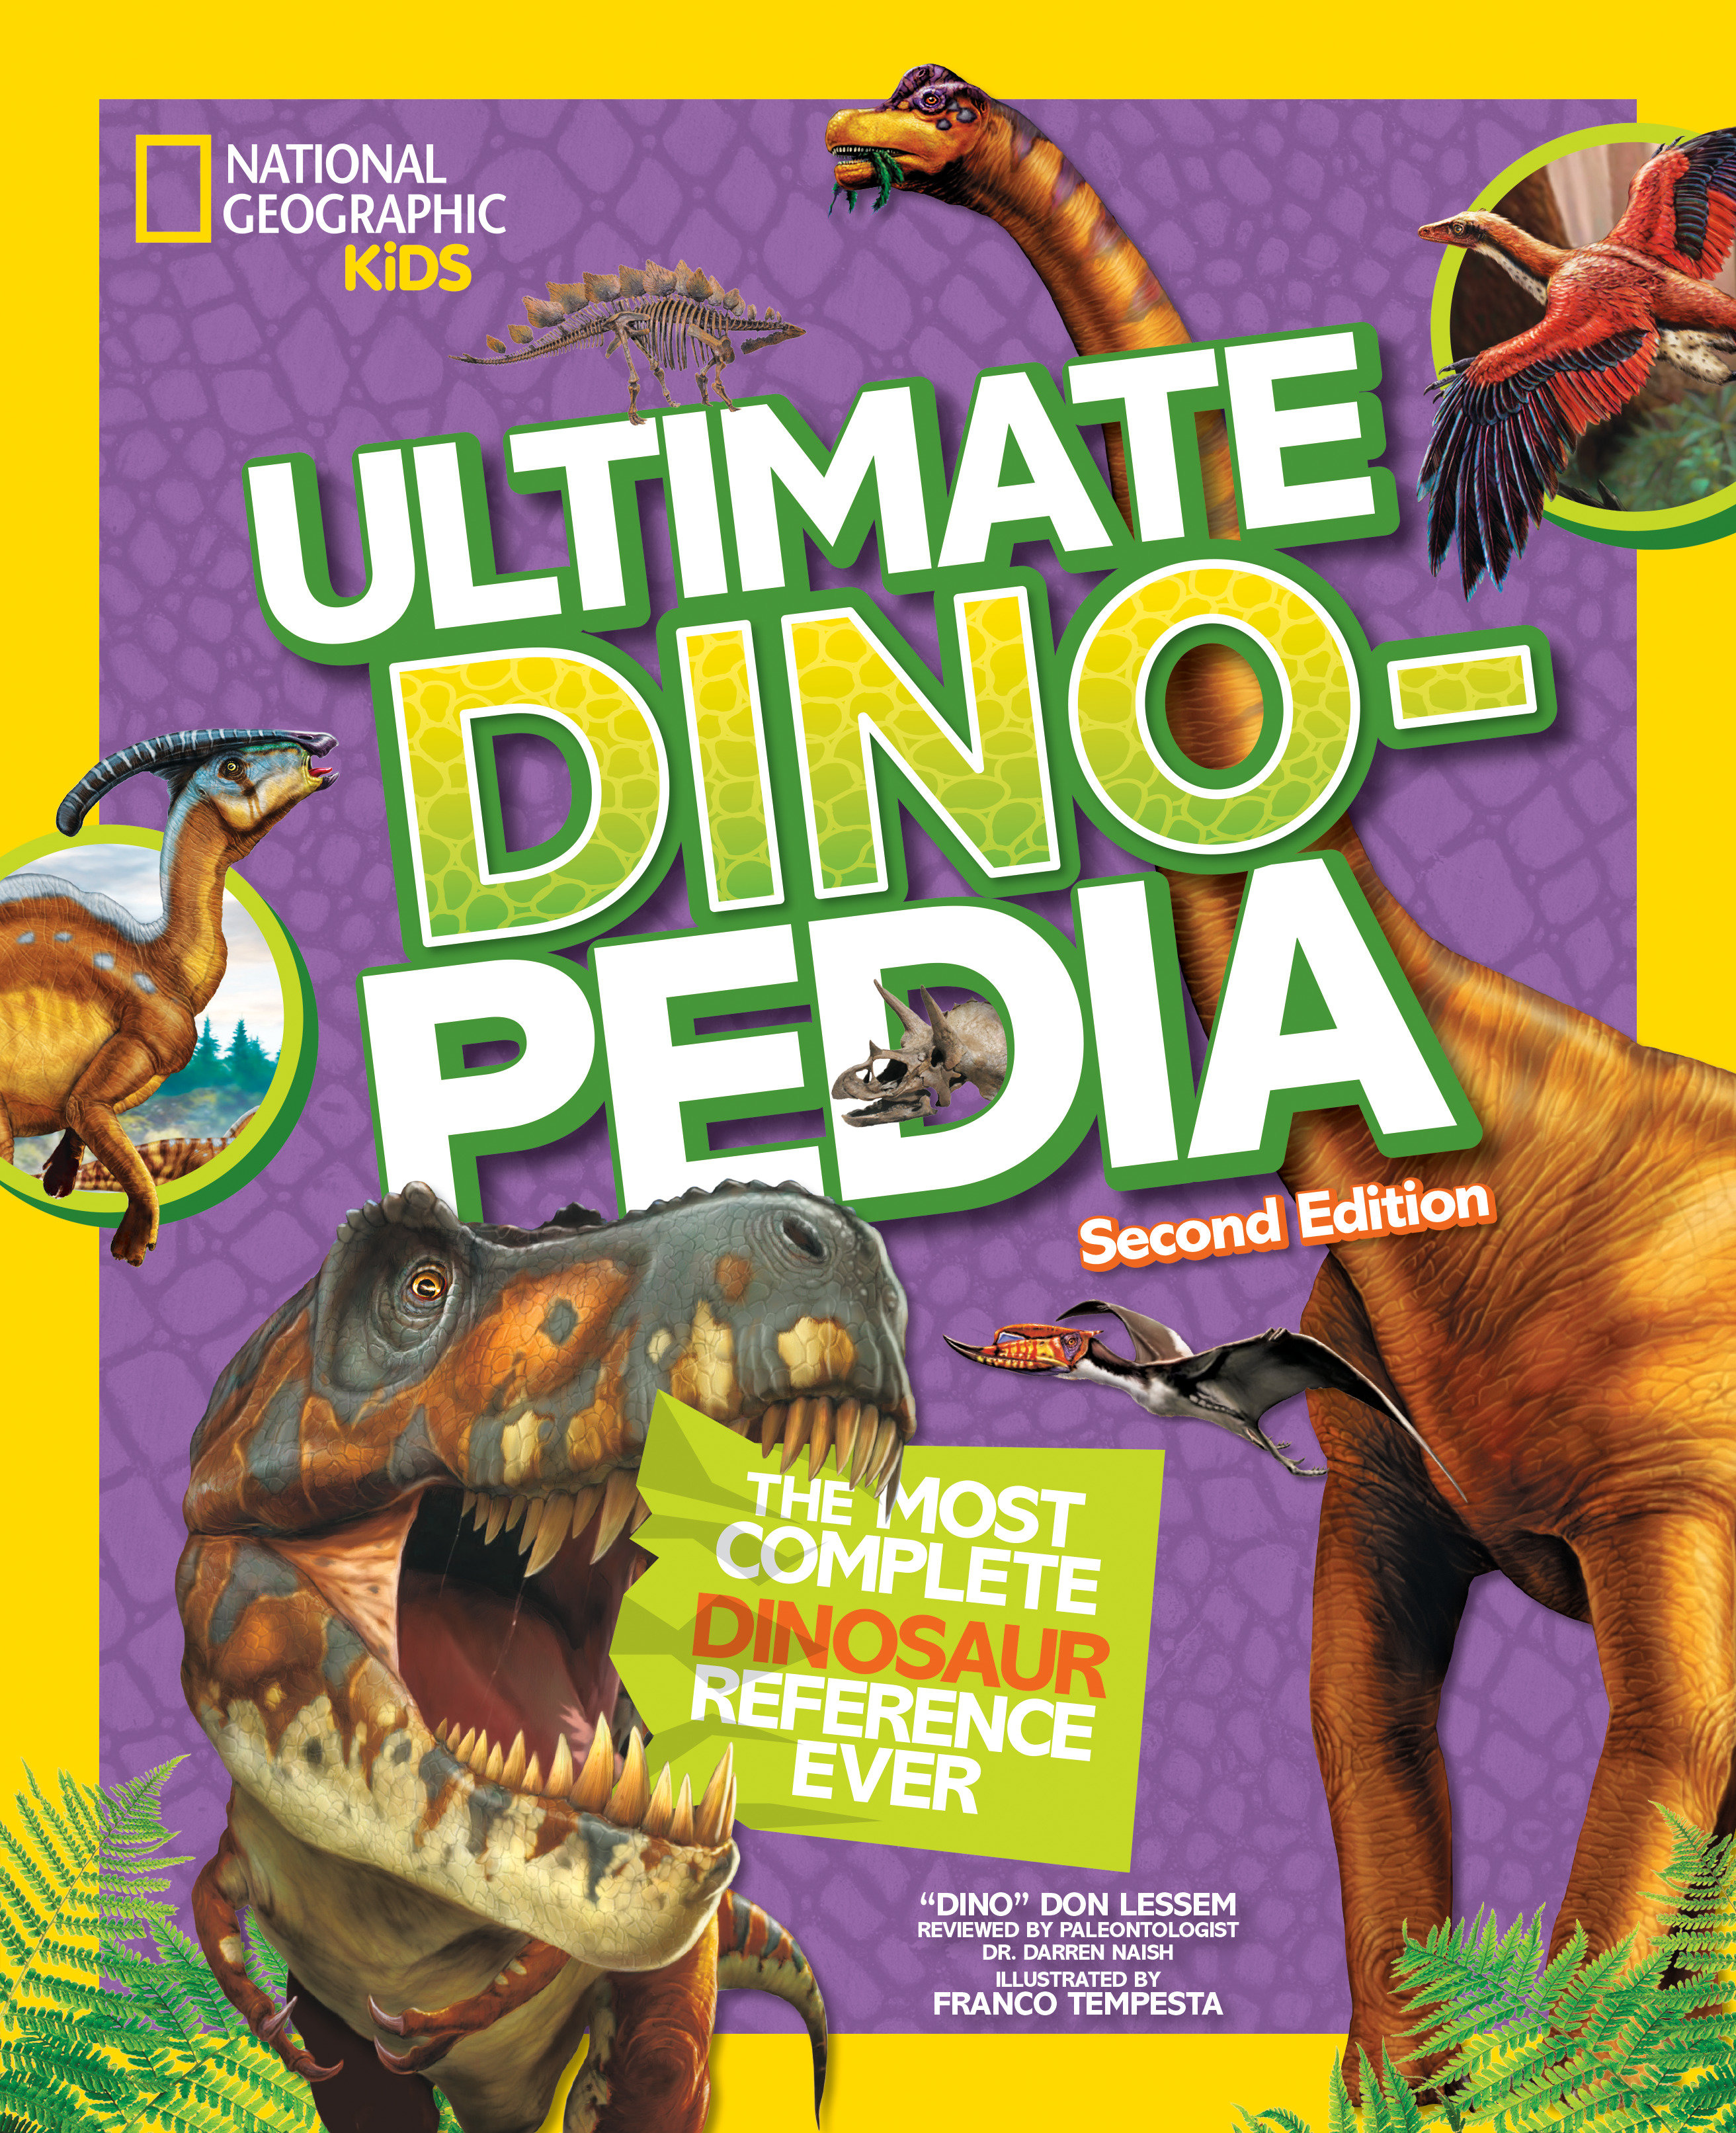 National Geographic Kids Ultimate Dinopedia, Second Edition (Hardcover Book)